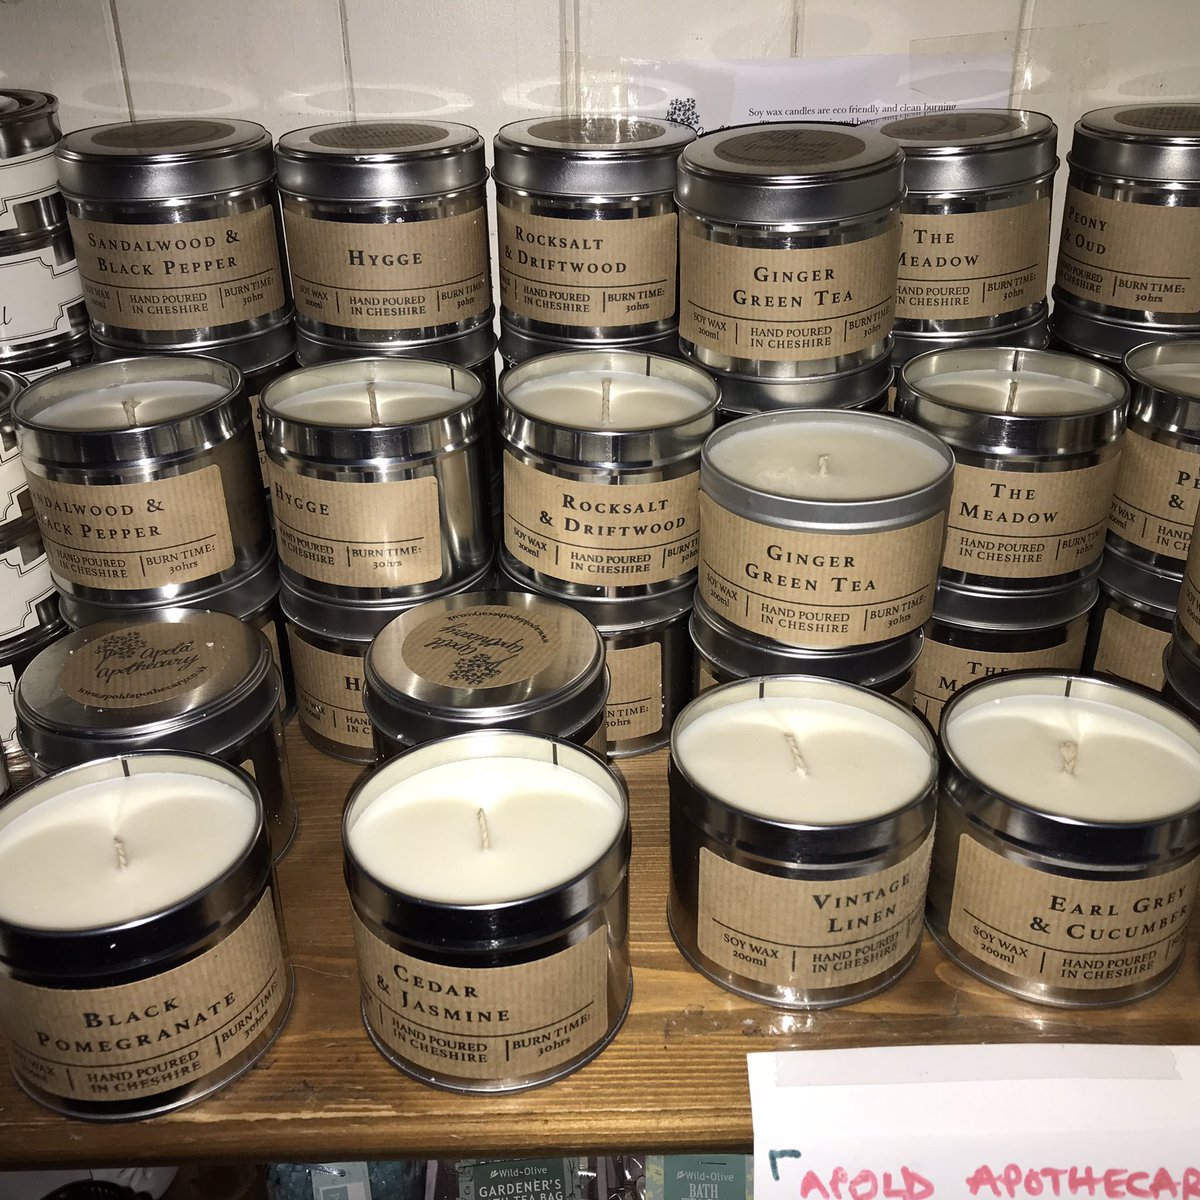 Also #FullyRestocked with these fabulous #TinCandles from @pintailcandles and @apoldapothecary - too many to choose from 🤔? #BishyRoadShopping #WhatAChoice #ScentedCandles